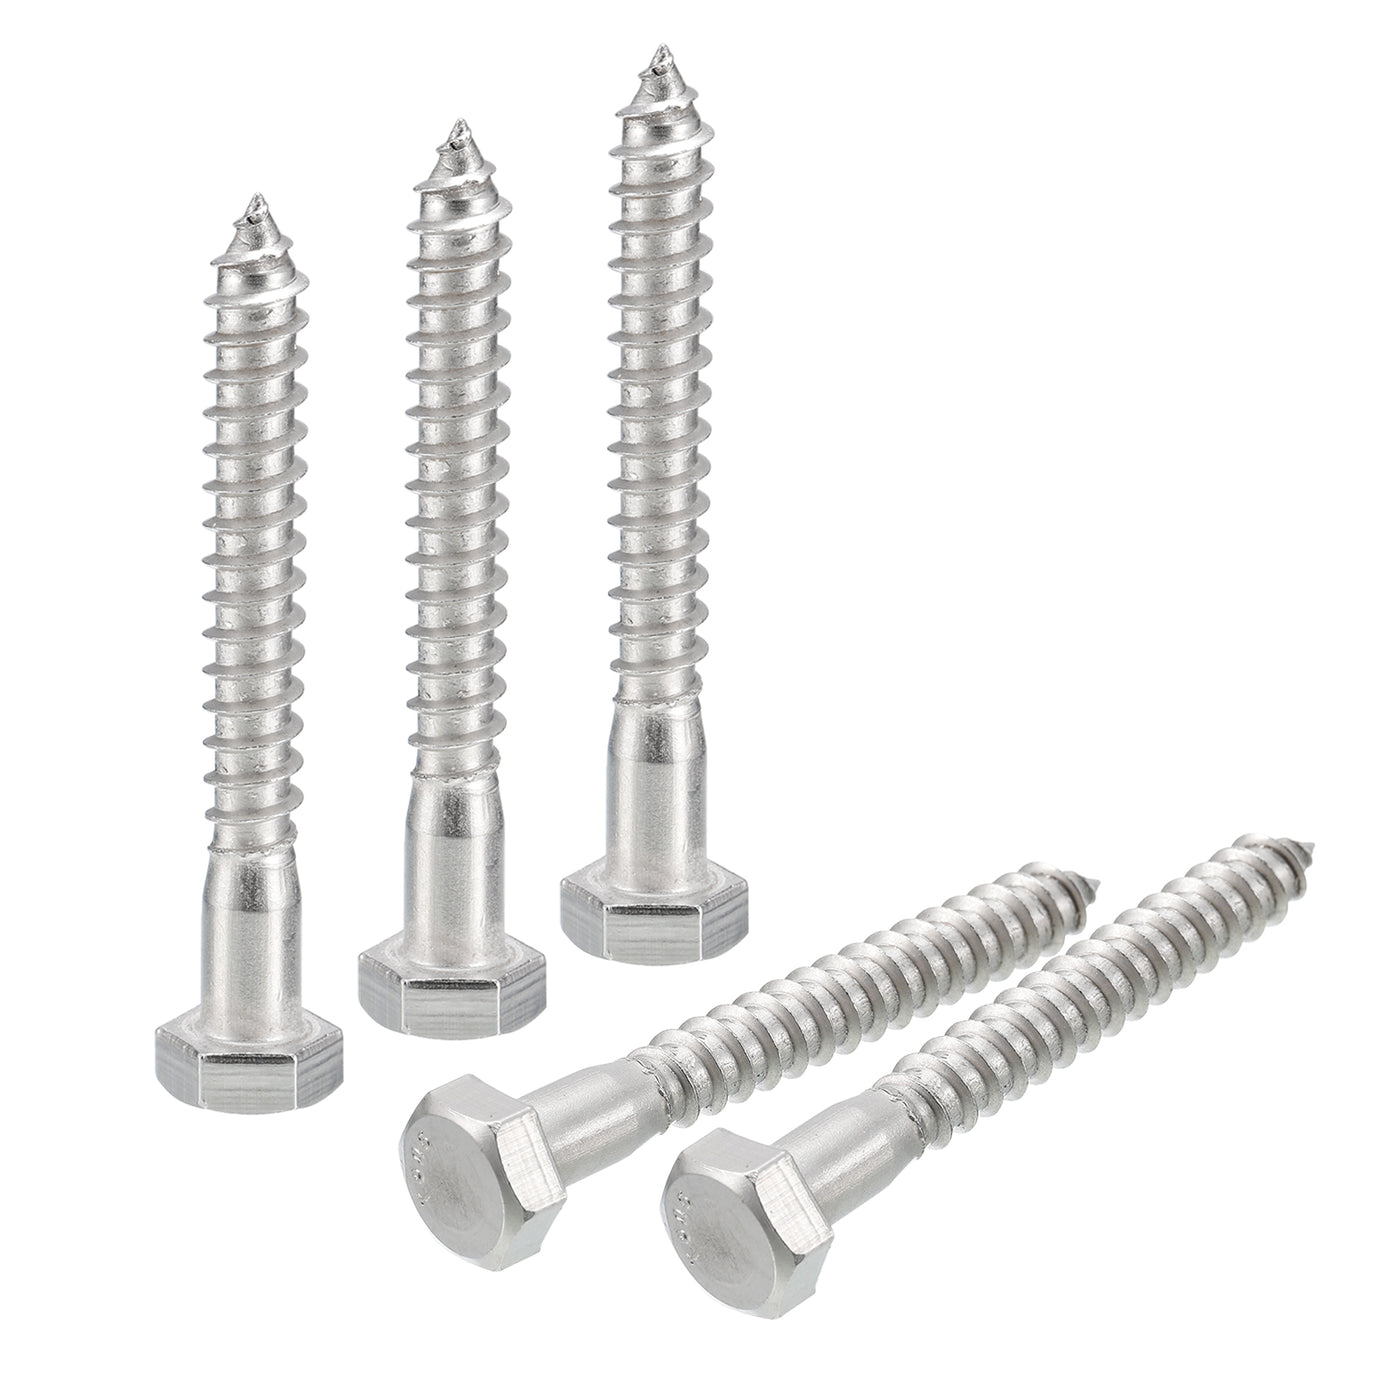 uxcell Uxcell Hex Head Lag Screws Bolts, 20pcs 5/16" x 2-1/2" 304 Stainless Steel Wood Screws